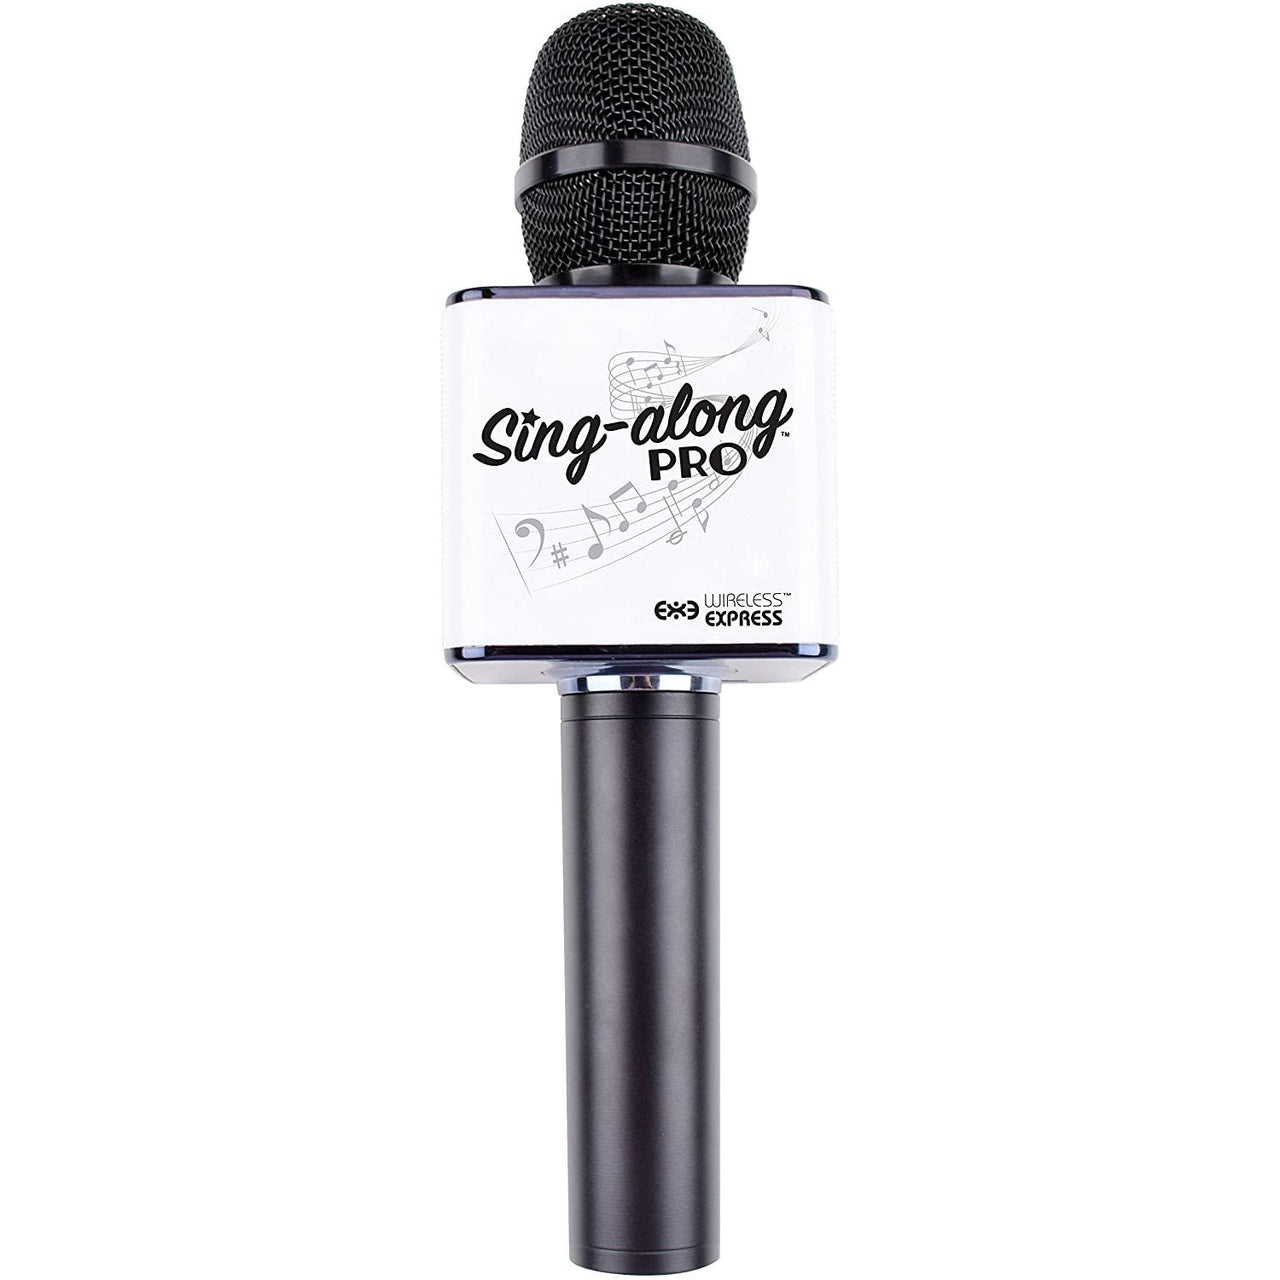 sing A long microphone